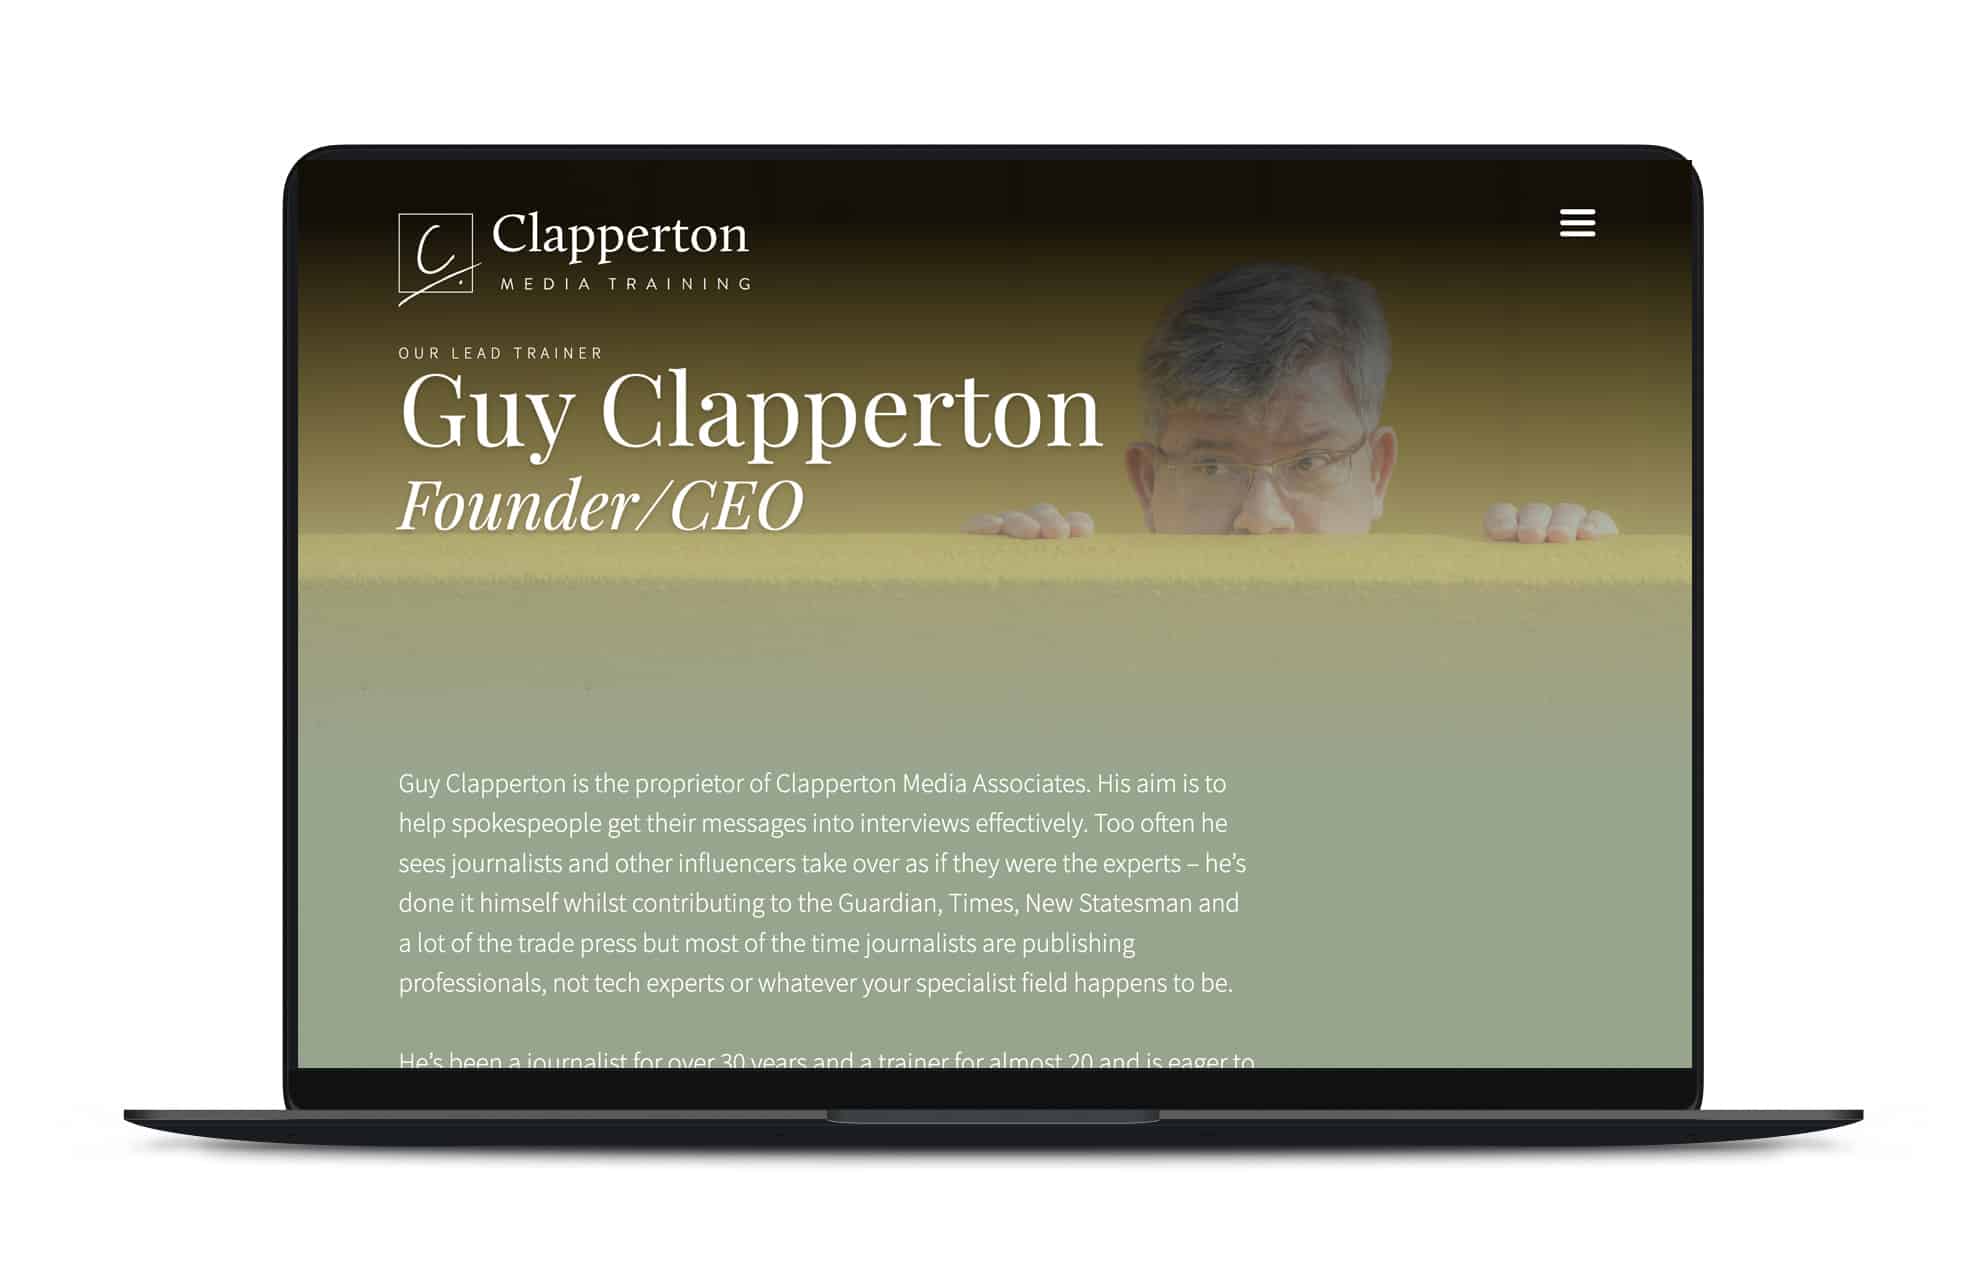 Guy Clapperton's profile page on the website displayed on a laptop